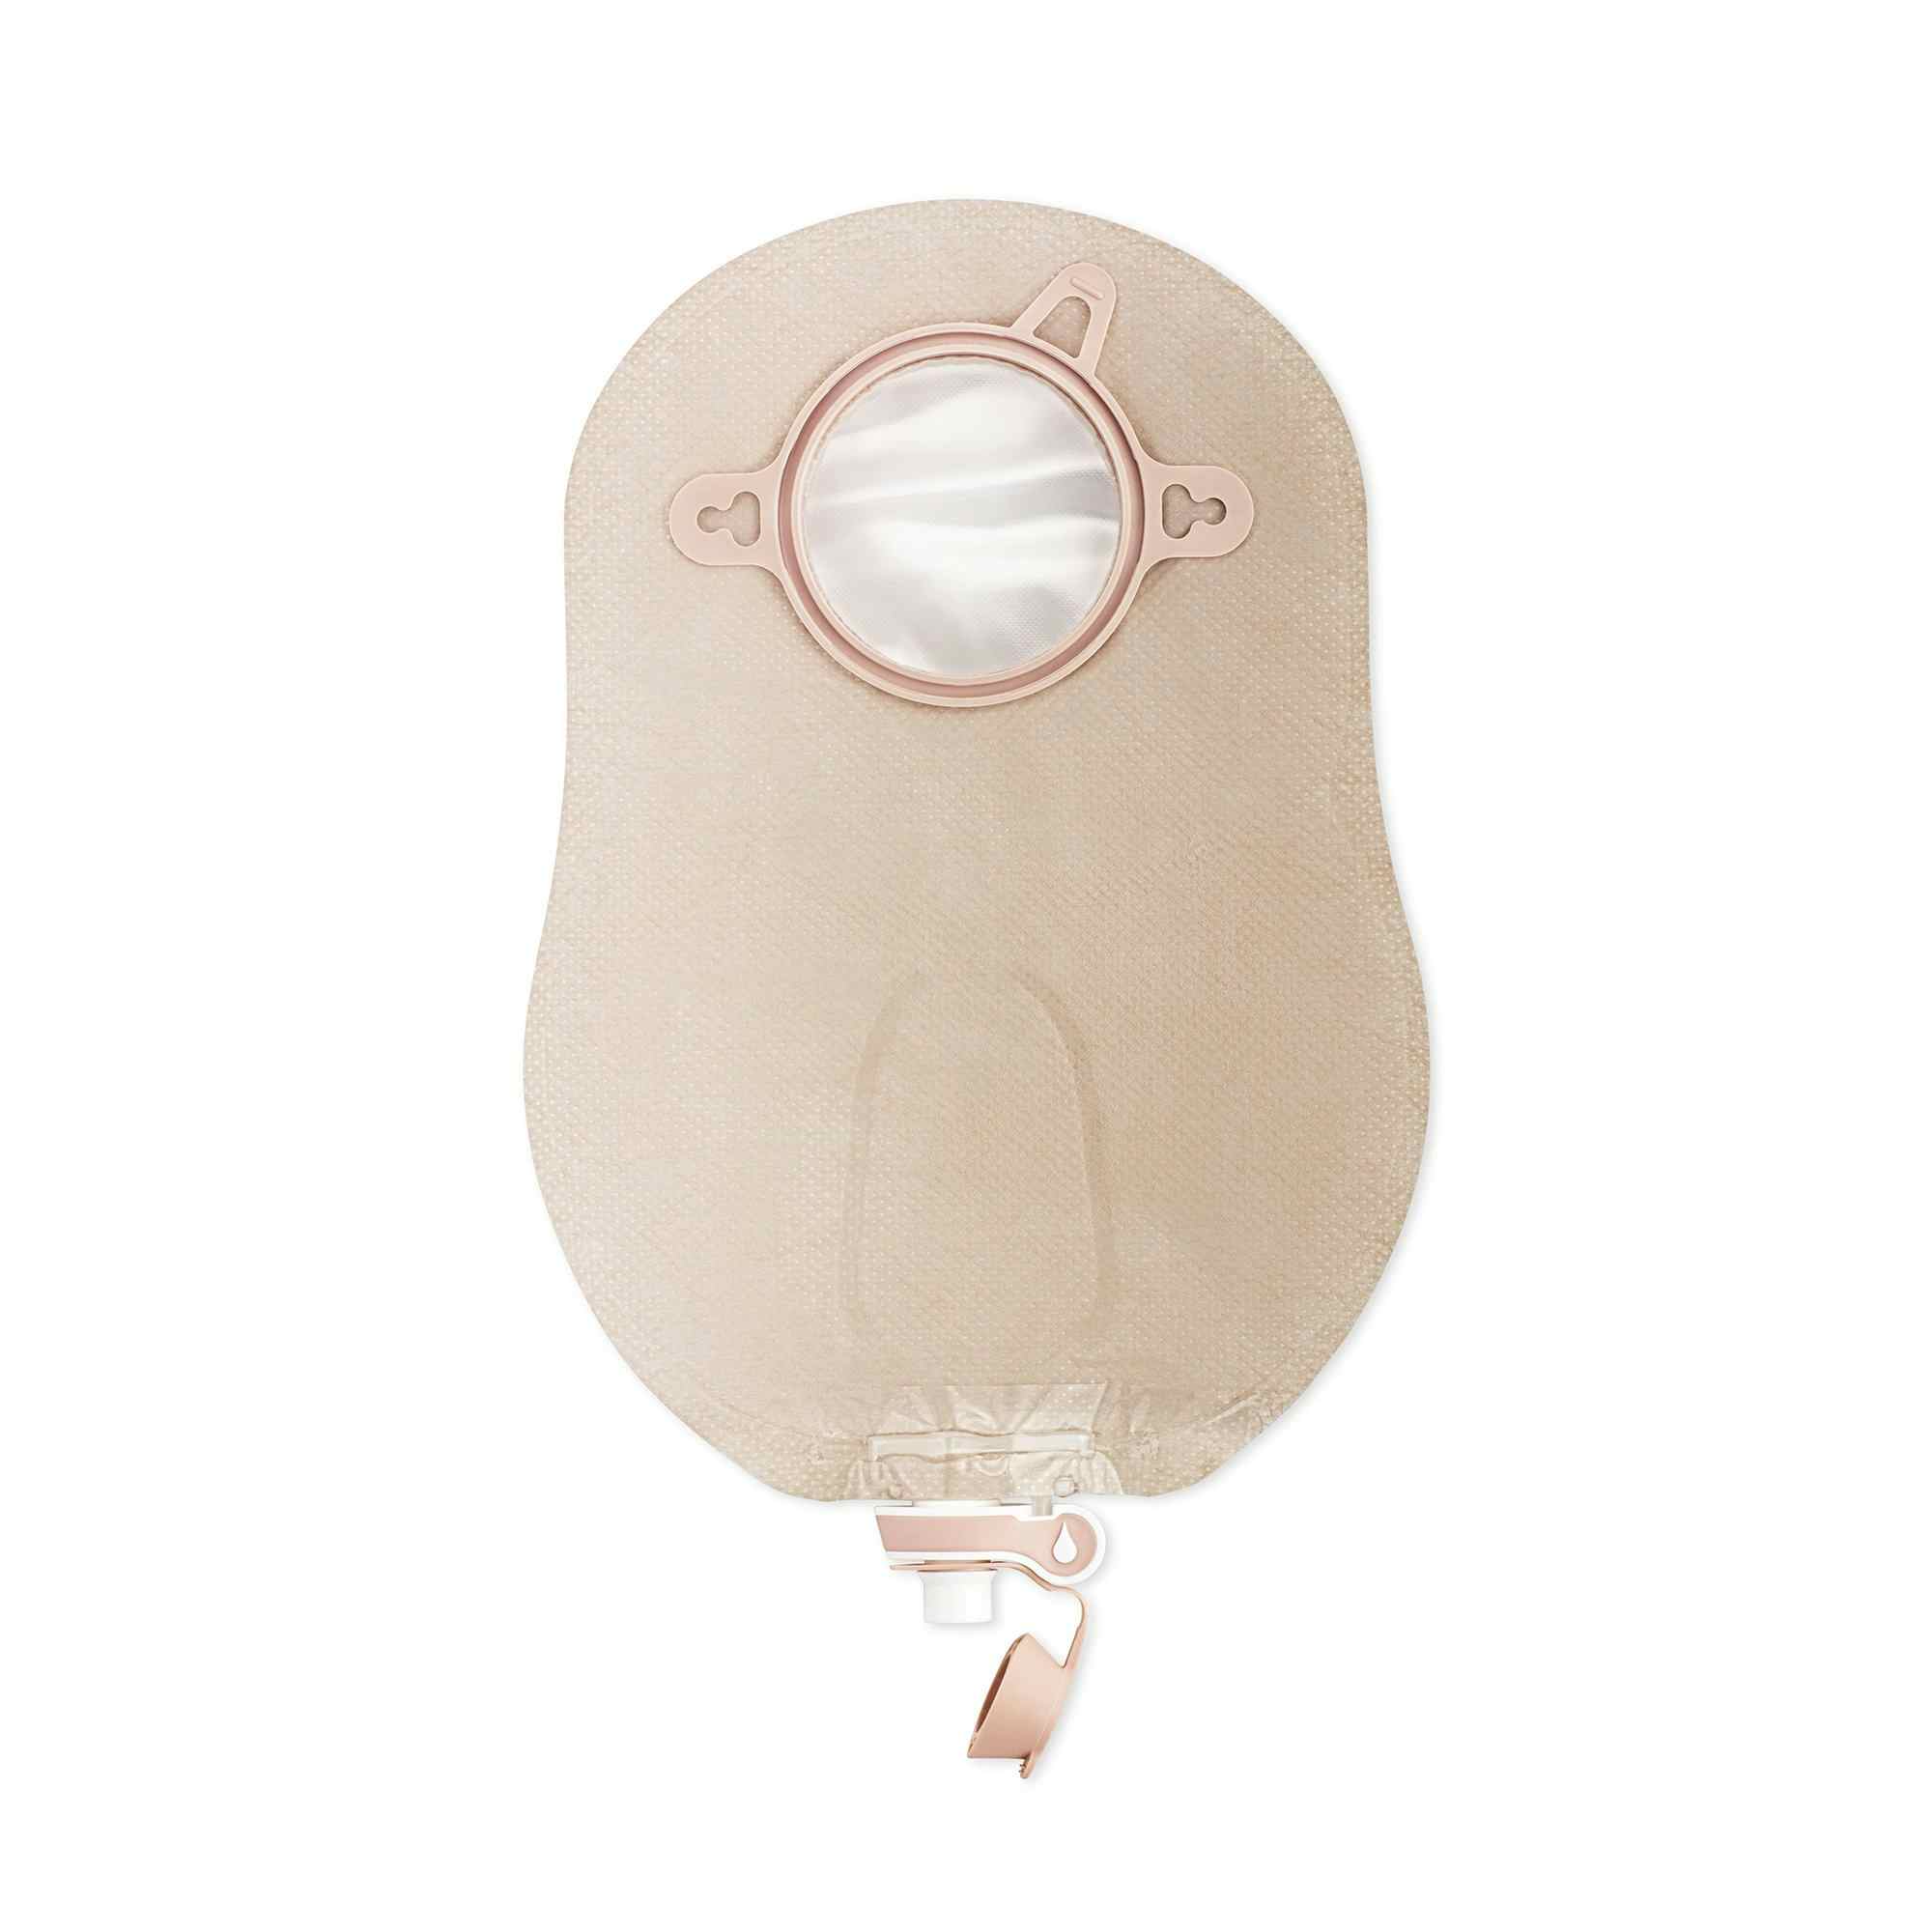 New Image Two-Piece Urostomy Pouch, Ultra-Clear